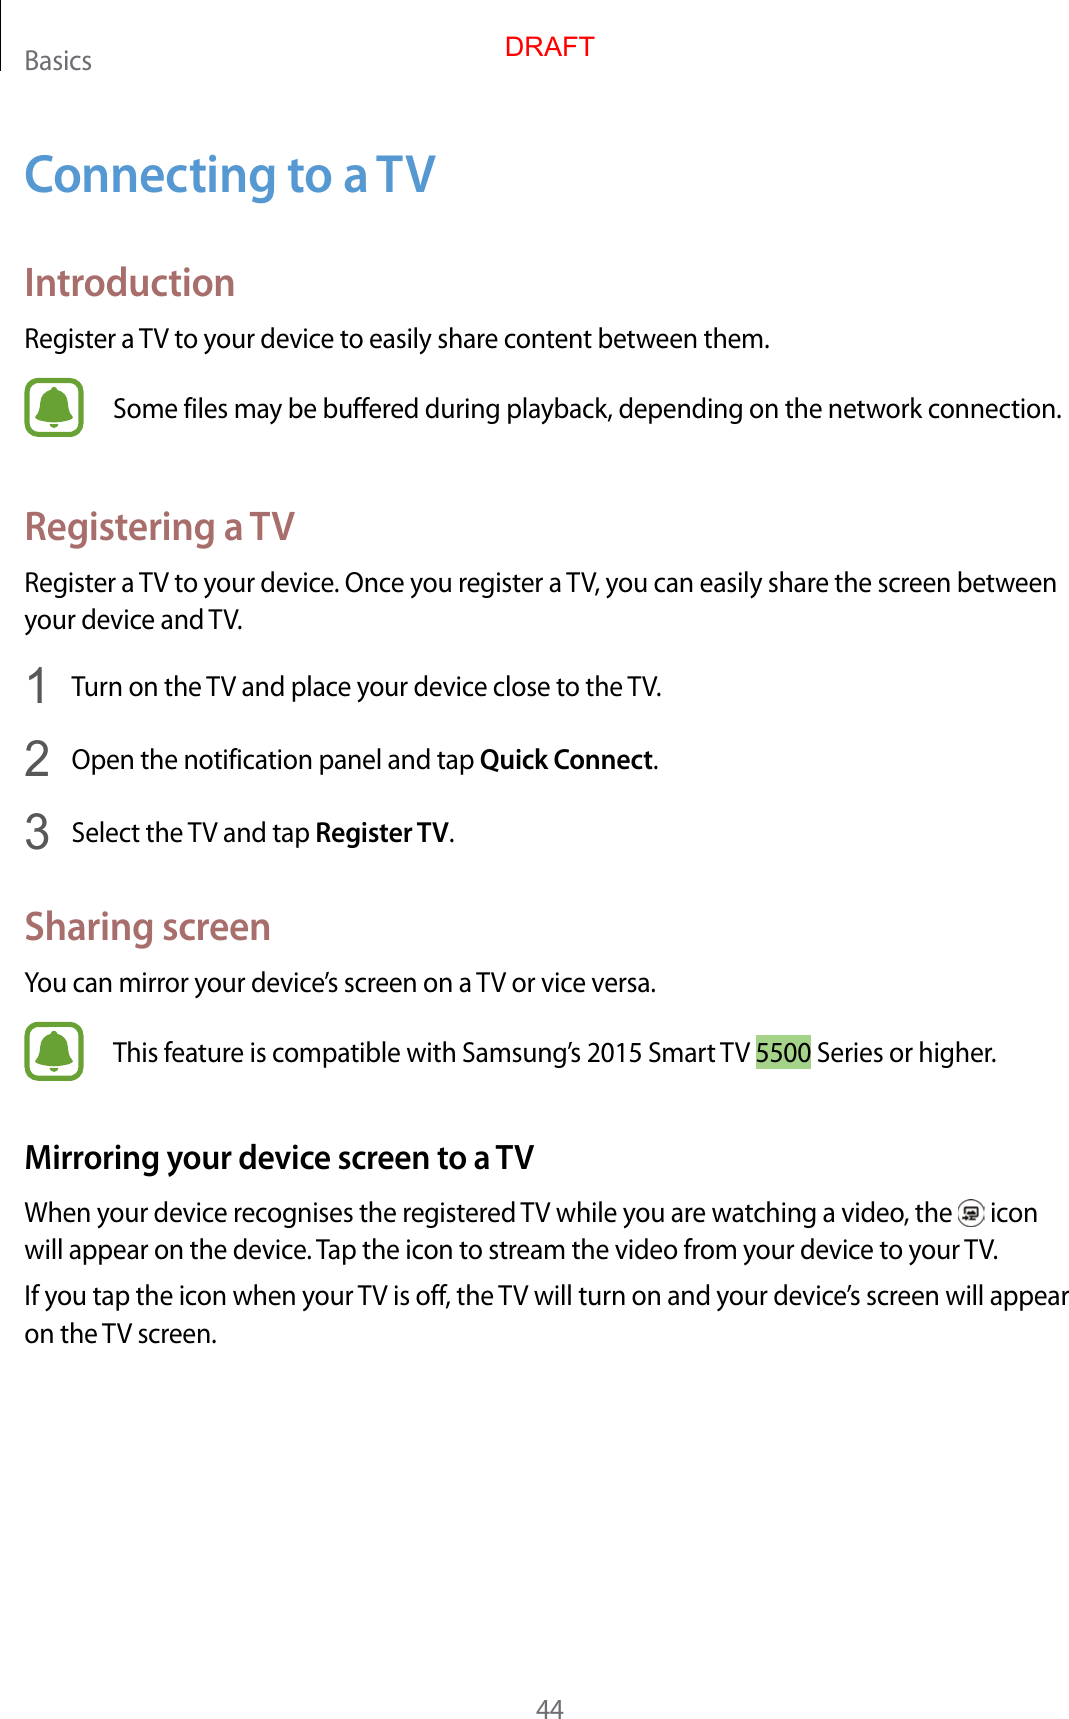 Basics44C onnecting to a TVIntroductionRegister a TV to your device t o easily shar e c ont ent between them.Some files may be buffer ed during pla yback, depending on the network connection.Registering a TVRegister a TV to your device. Once you reg ister a TV, you can easily shar e the scr een between your device and TV.1  Turn on the TV and place your device close to the TV.2  Open the notification panel and tap Quick Connect.3  Select the TV and tap Register TV.Sharing screenYou can mirror your device’s screen on a TV or vice versa.This f eatur e is c ompatible with Samsung’s 2015 Smart TV 5500 Series or higher.Mirroring your de vic e screen t o a TVWhen your devic e r ecog nises the r eg ister ed TV while you are wat ching a video, the   icon will appear on the device . Tap the icon to stream the video from y our devic e t o y our TV.If you tap the icon when your TV is off , the TV will turn on and your devic e’s screen will appear on the TV screen.DRAFT